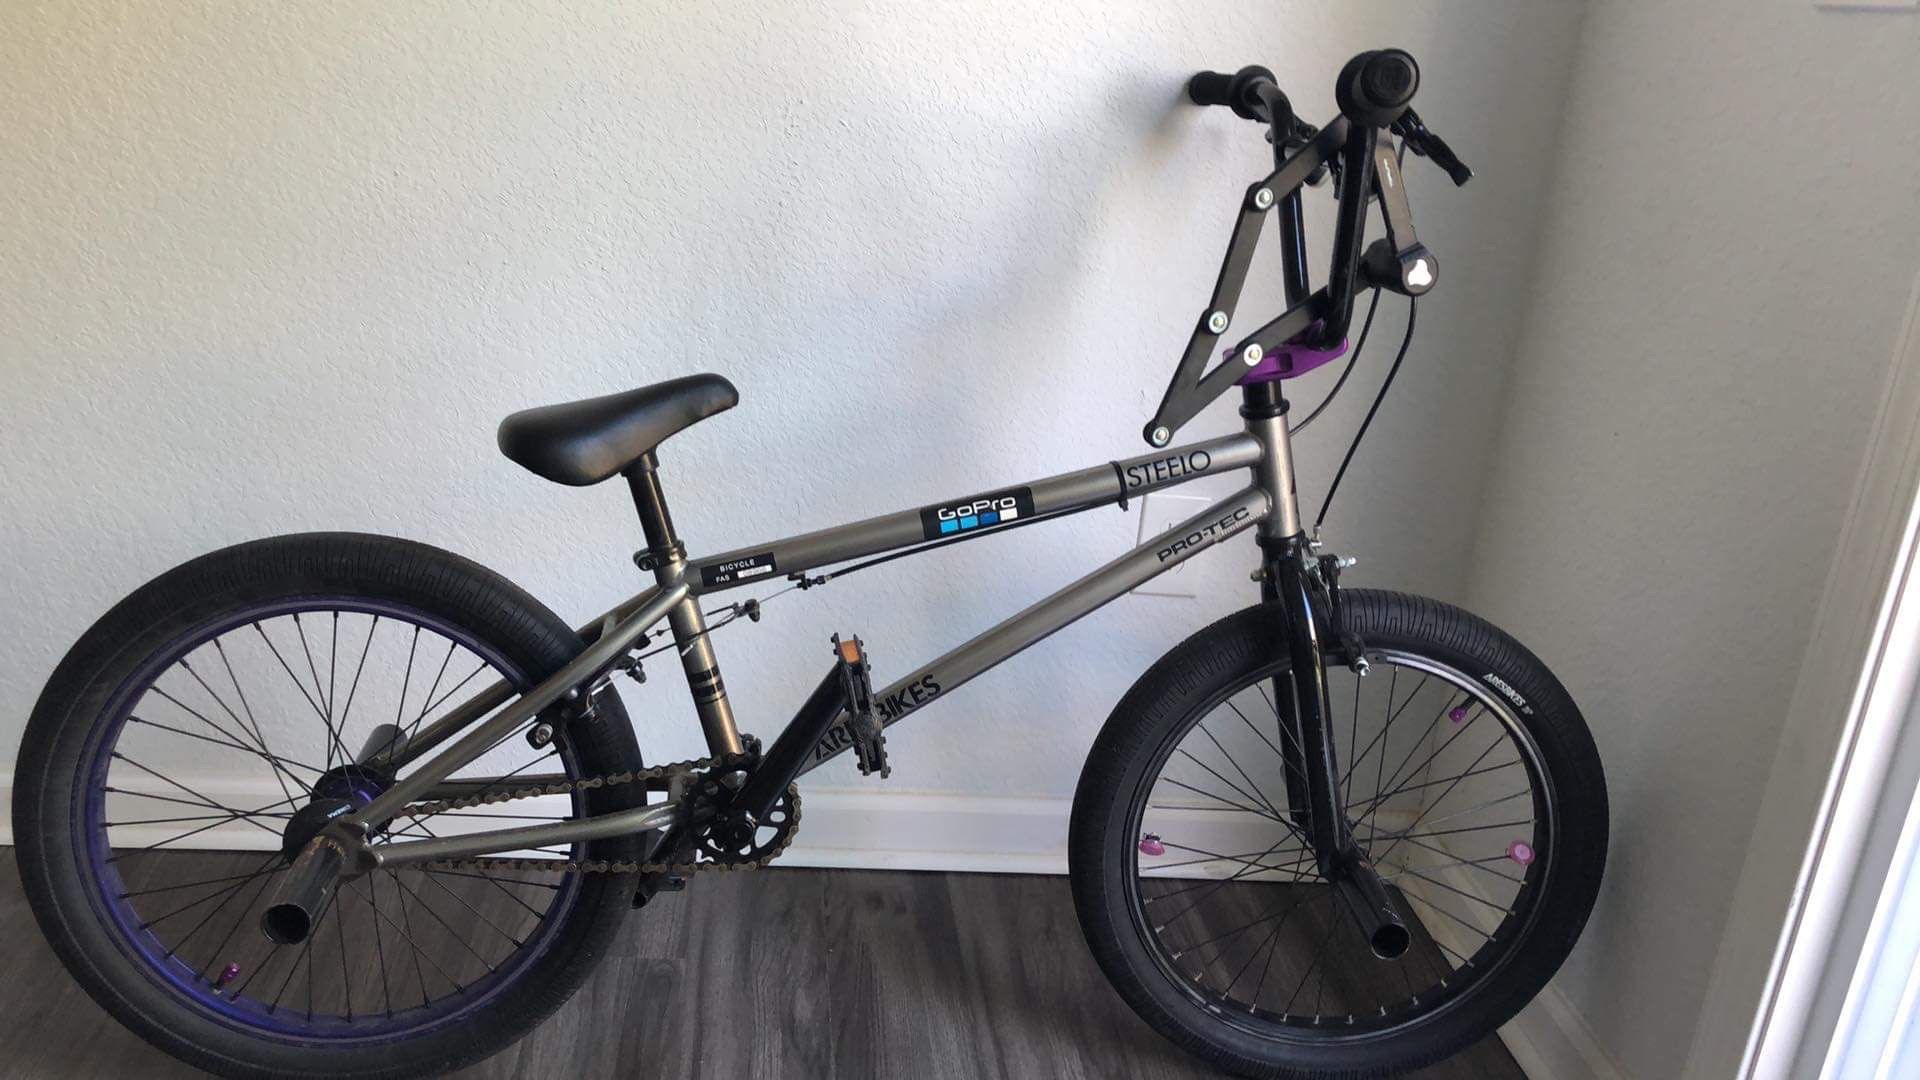 ARES Steelo BMX bike with extras